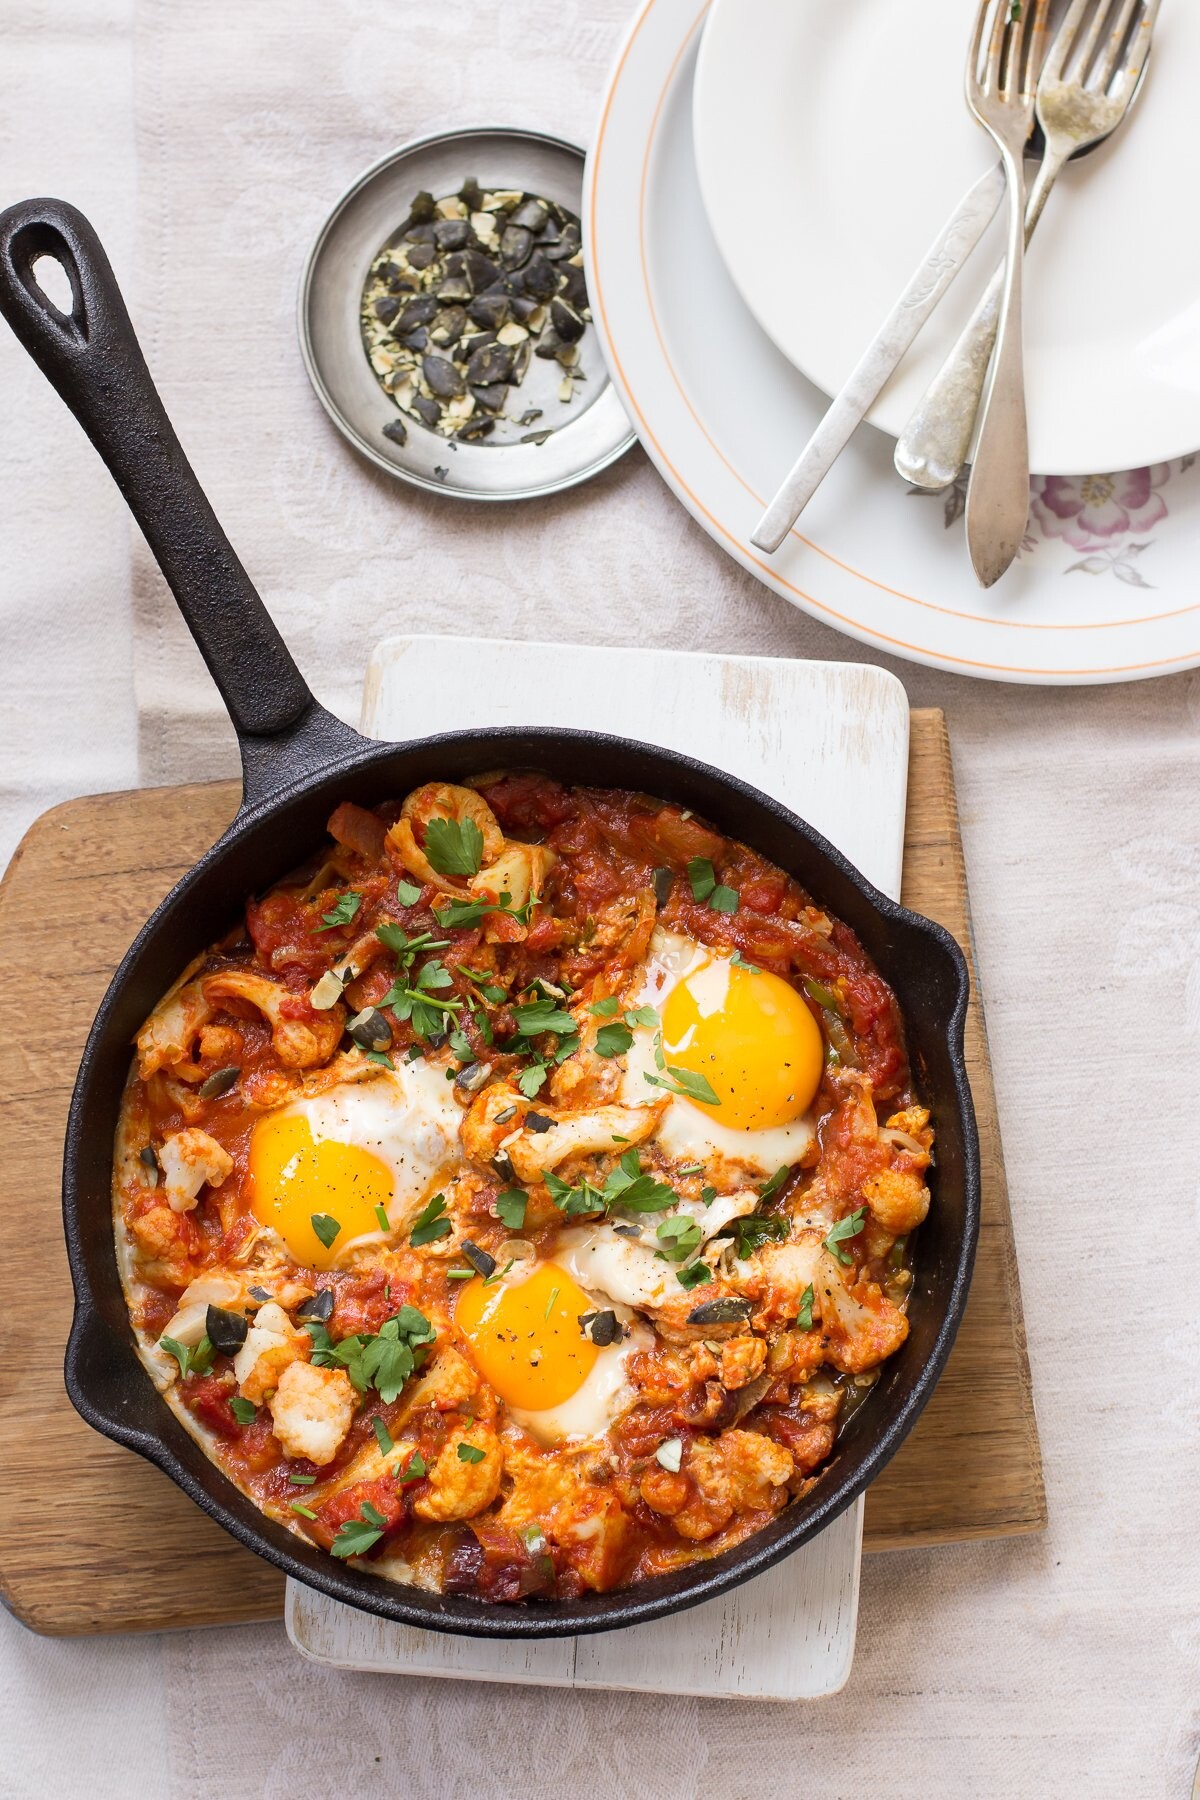 Cauliflower shakshuka is my winter variation of the classic Tunisian dish. I wanted the dish to look simple, healthy and ready-to-eat. 